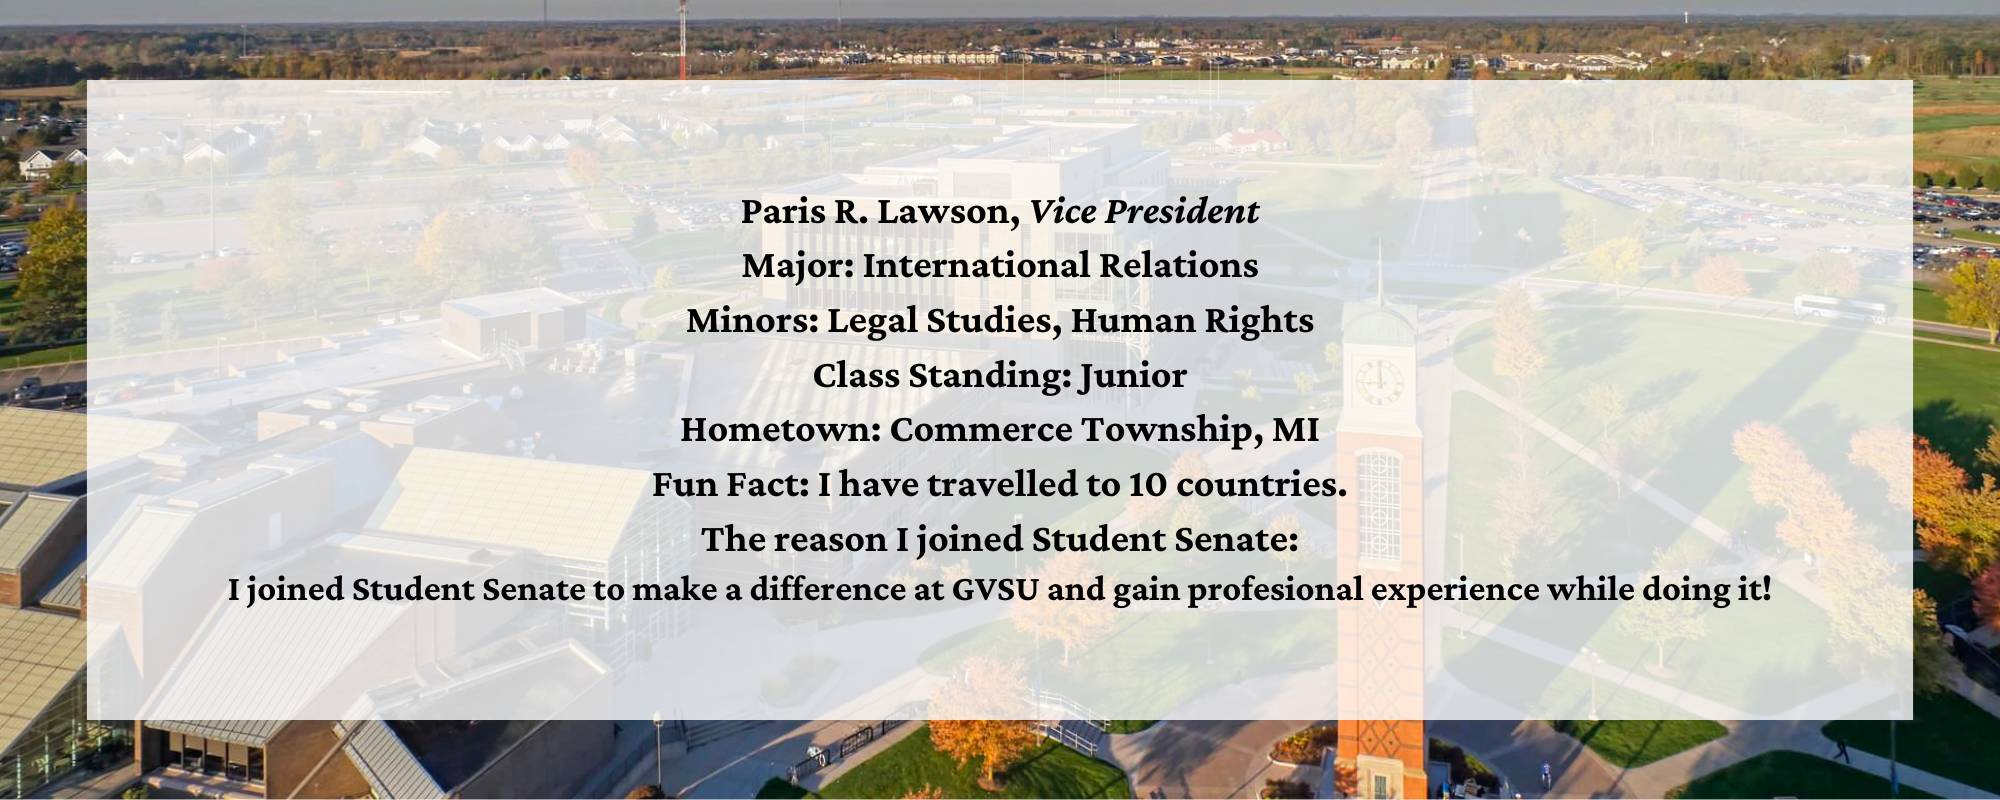 Paris R. Lawson, Vice President. Major: International Relations. Minors: Legal Studies, Human Rights. Class Standing: Junior. Hometown: Commerce Township, MI. Fun Fact: I have travelled to 10 countries. The reason I joined Student Senate:  I joined Student Senate to make a difference at GVSU and gain profesional experience while doing it!